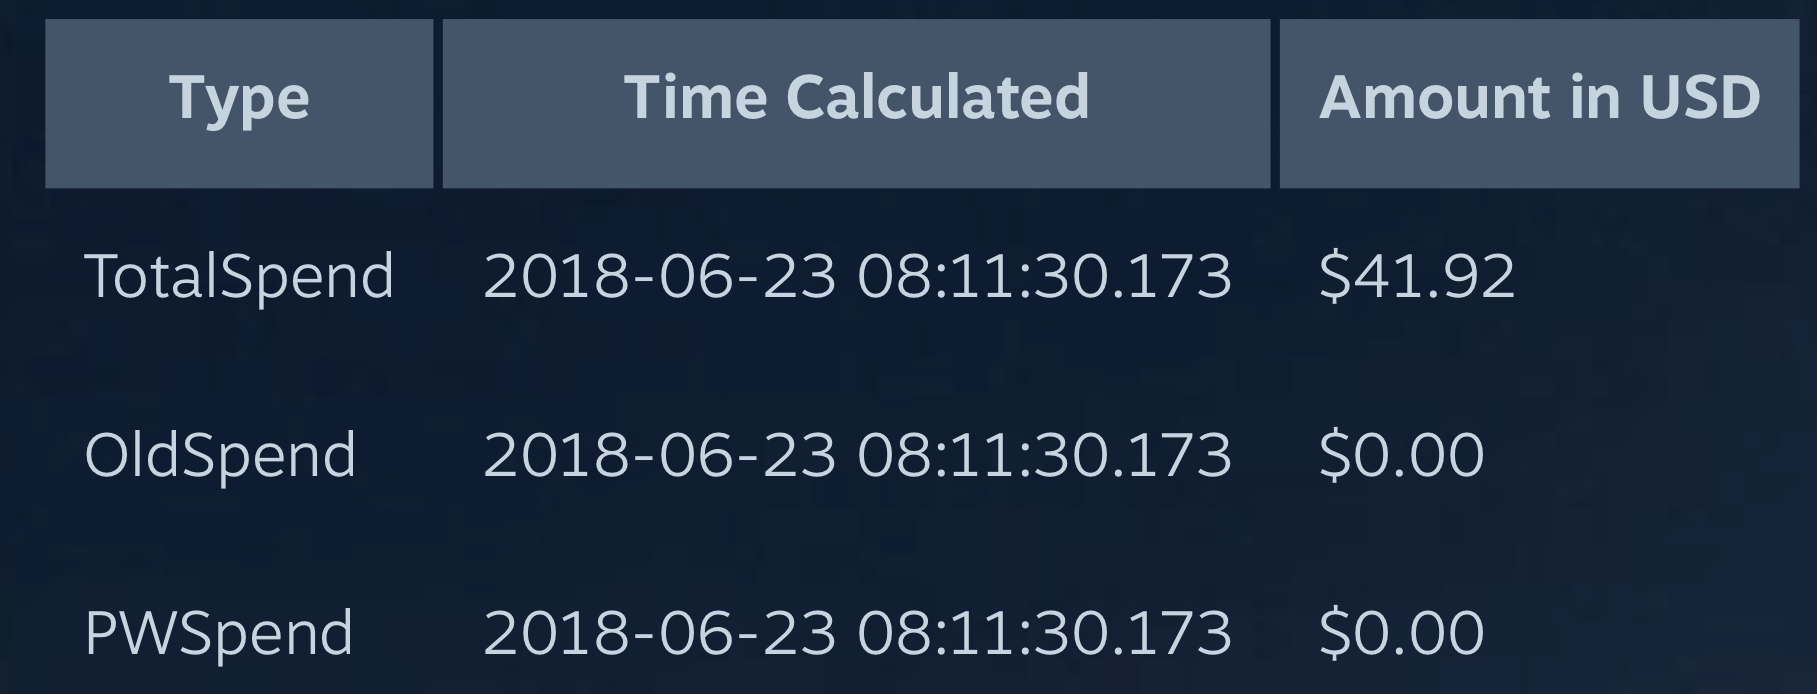 Time spent on steam фото 23